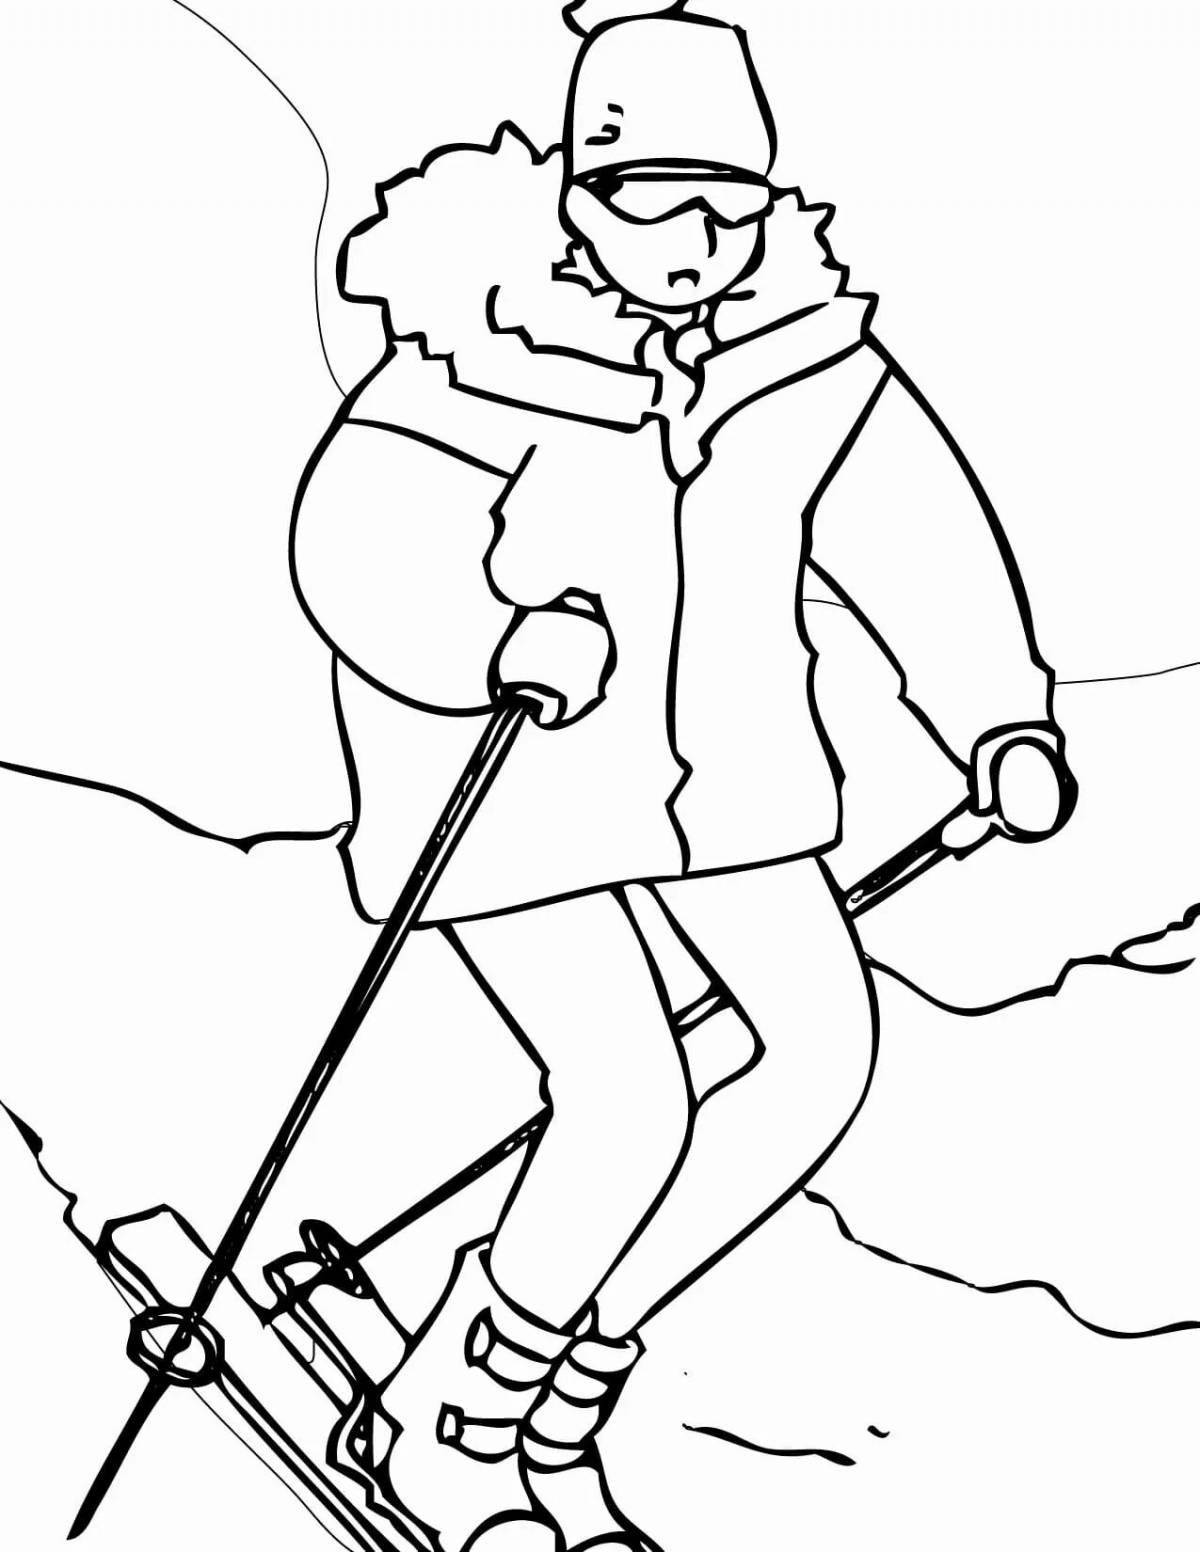 Coloring page energetic skiing